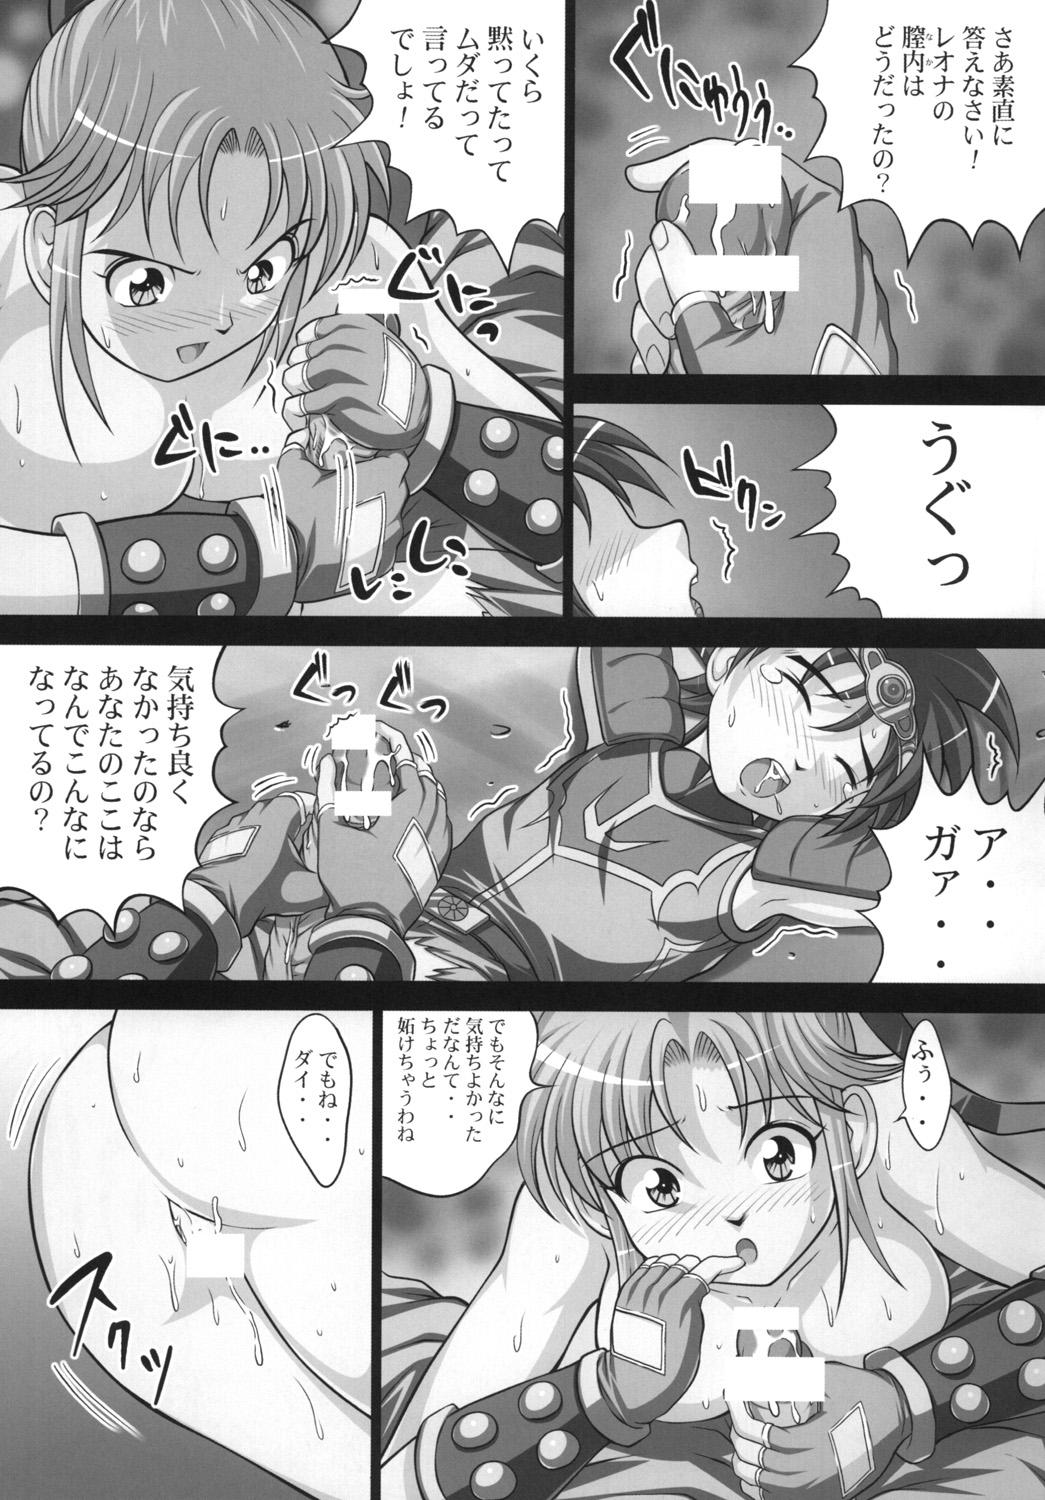 Old Inma no Utage 2 - Dragon quest dai no daibouken T Girl - Page 6